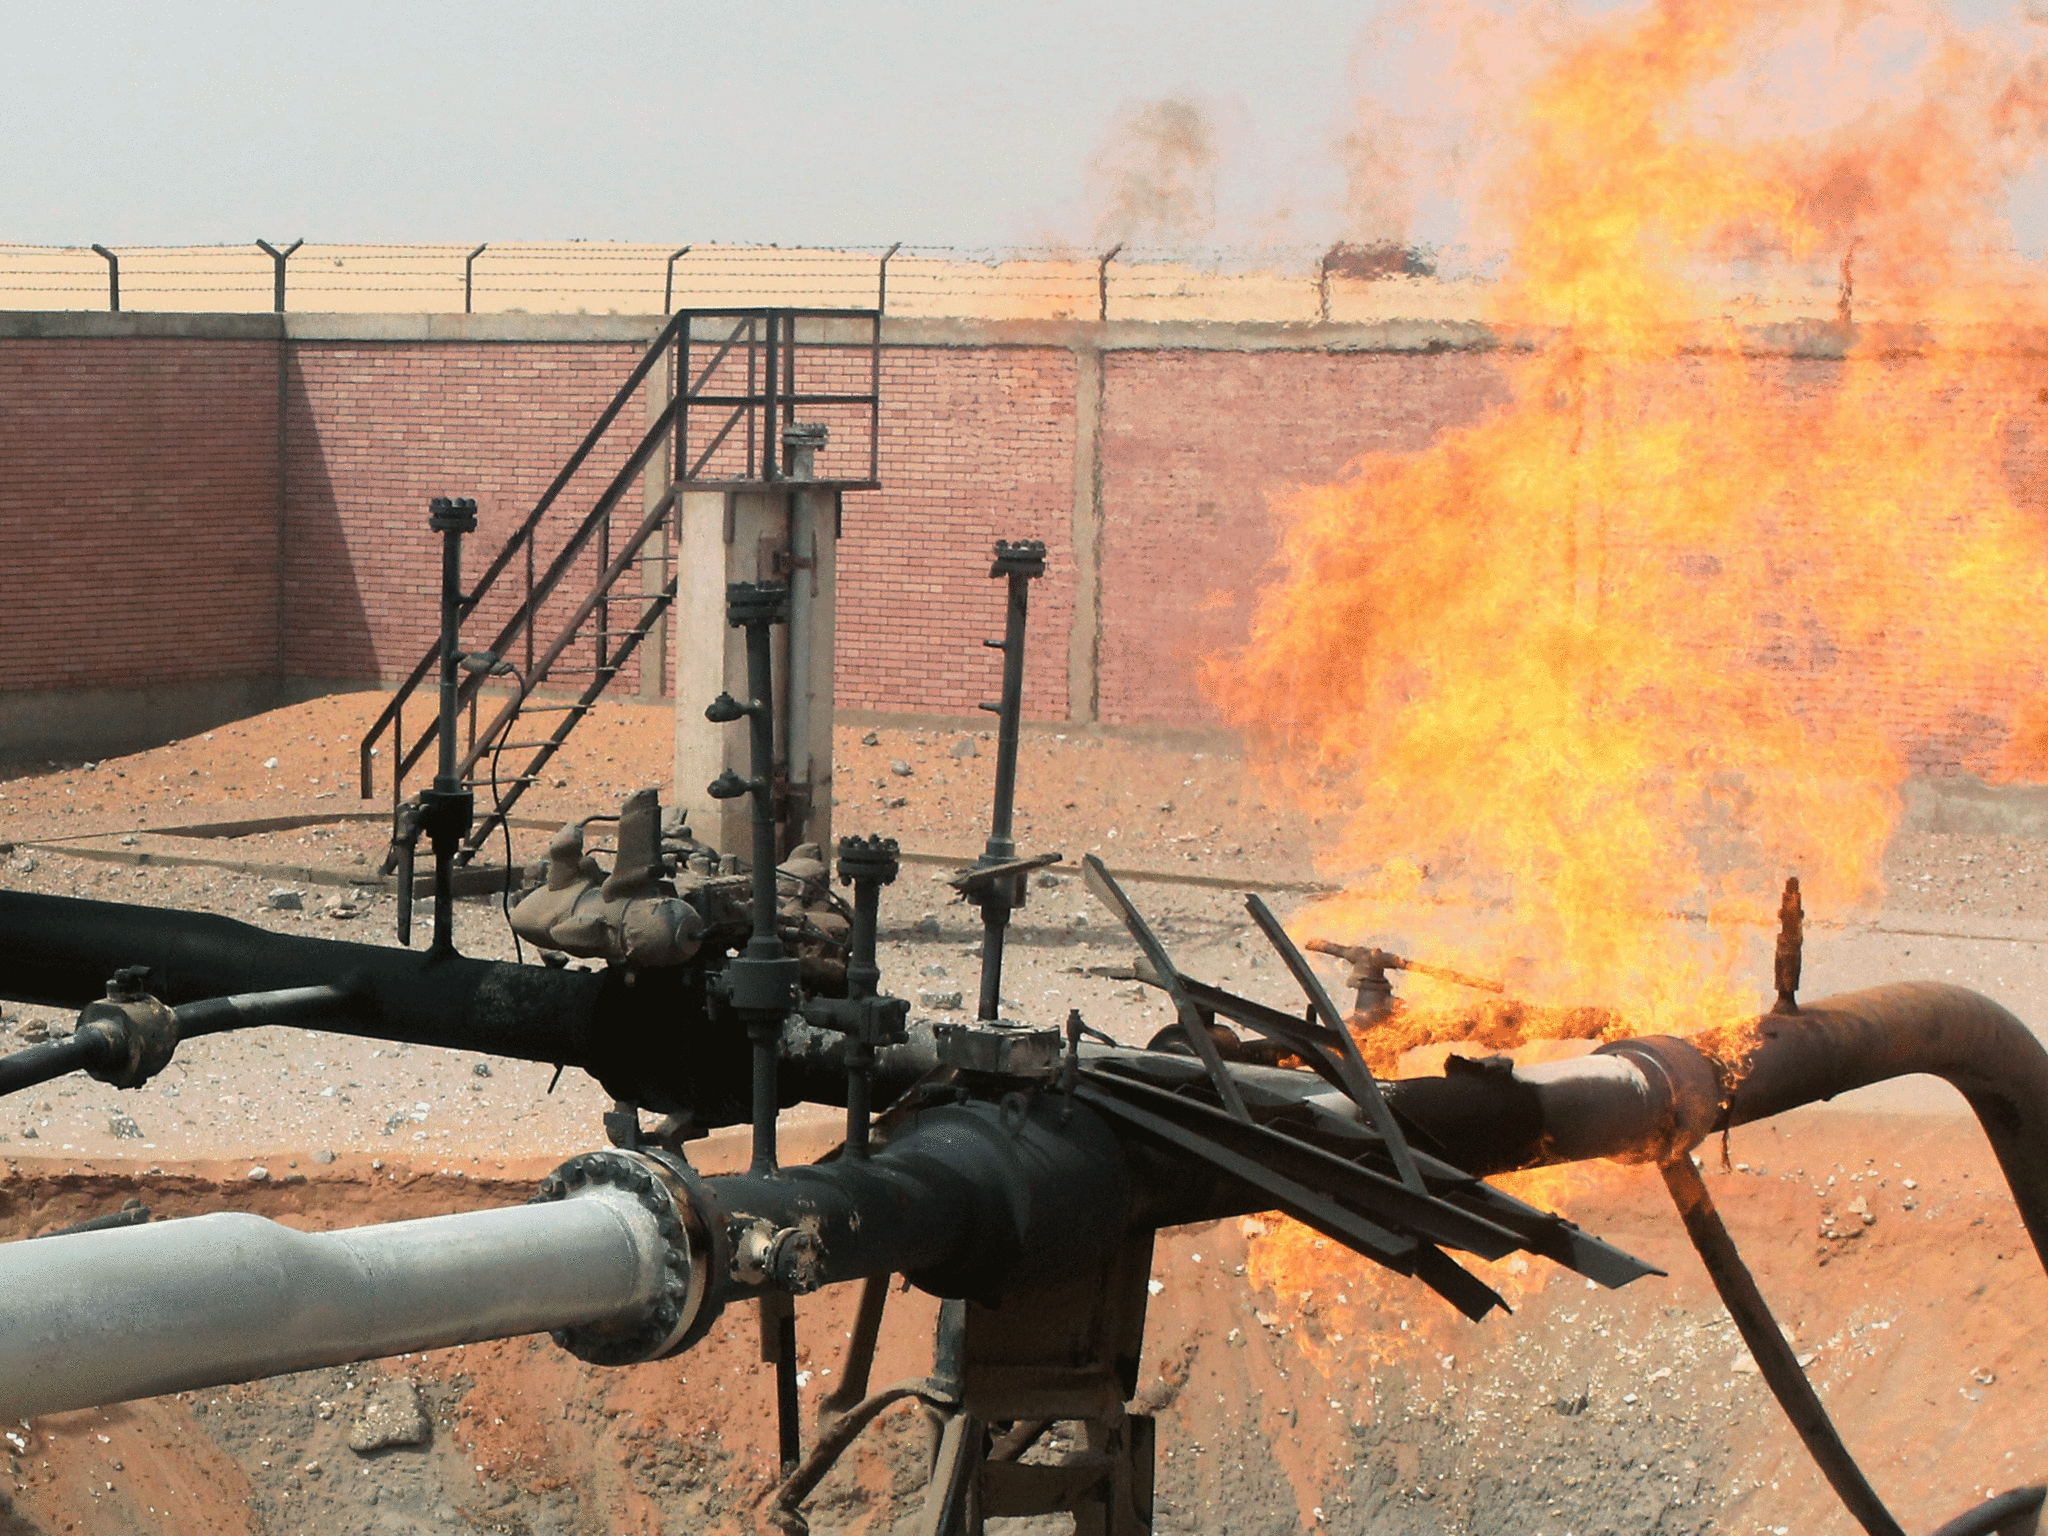 Flames rise from an Egyptian gas pipeline after it was bombed by saboteurs in 2011